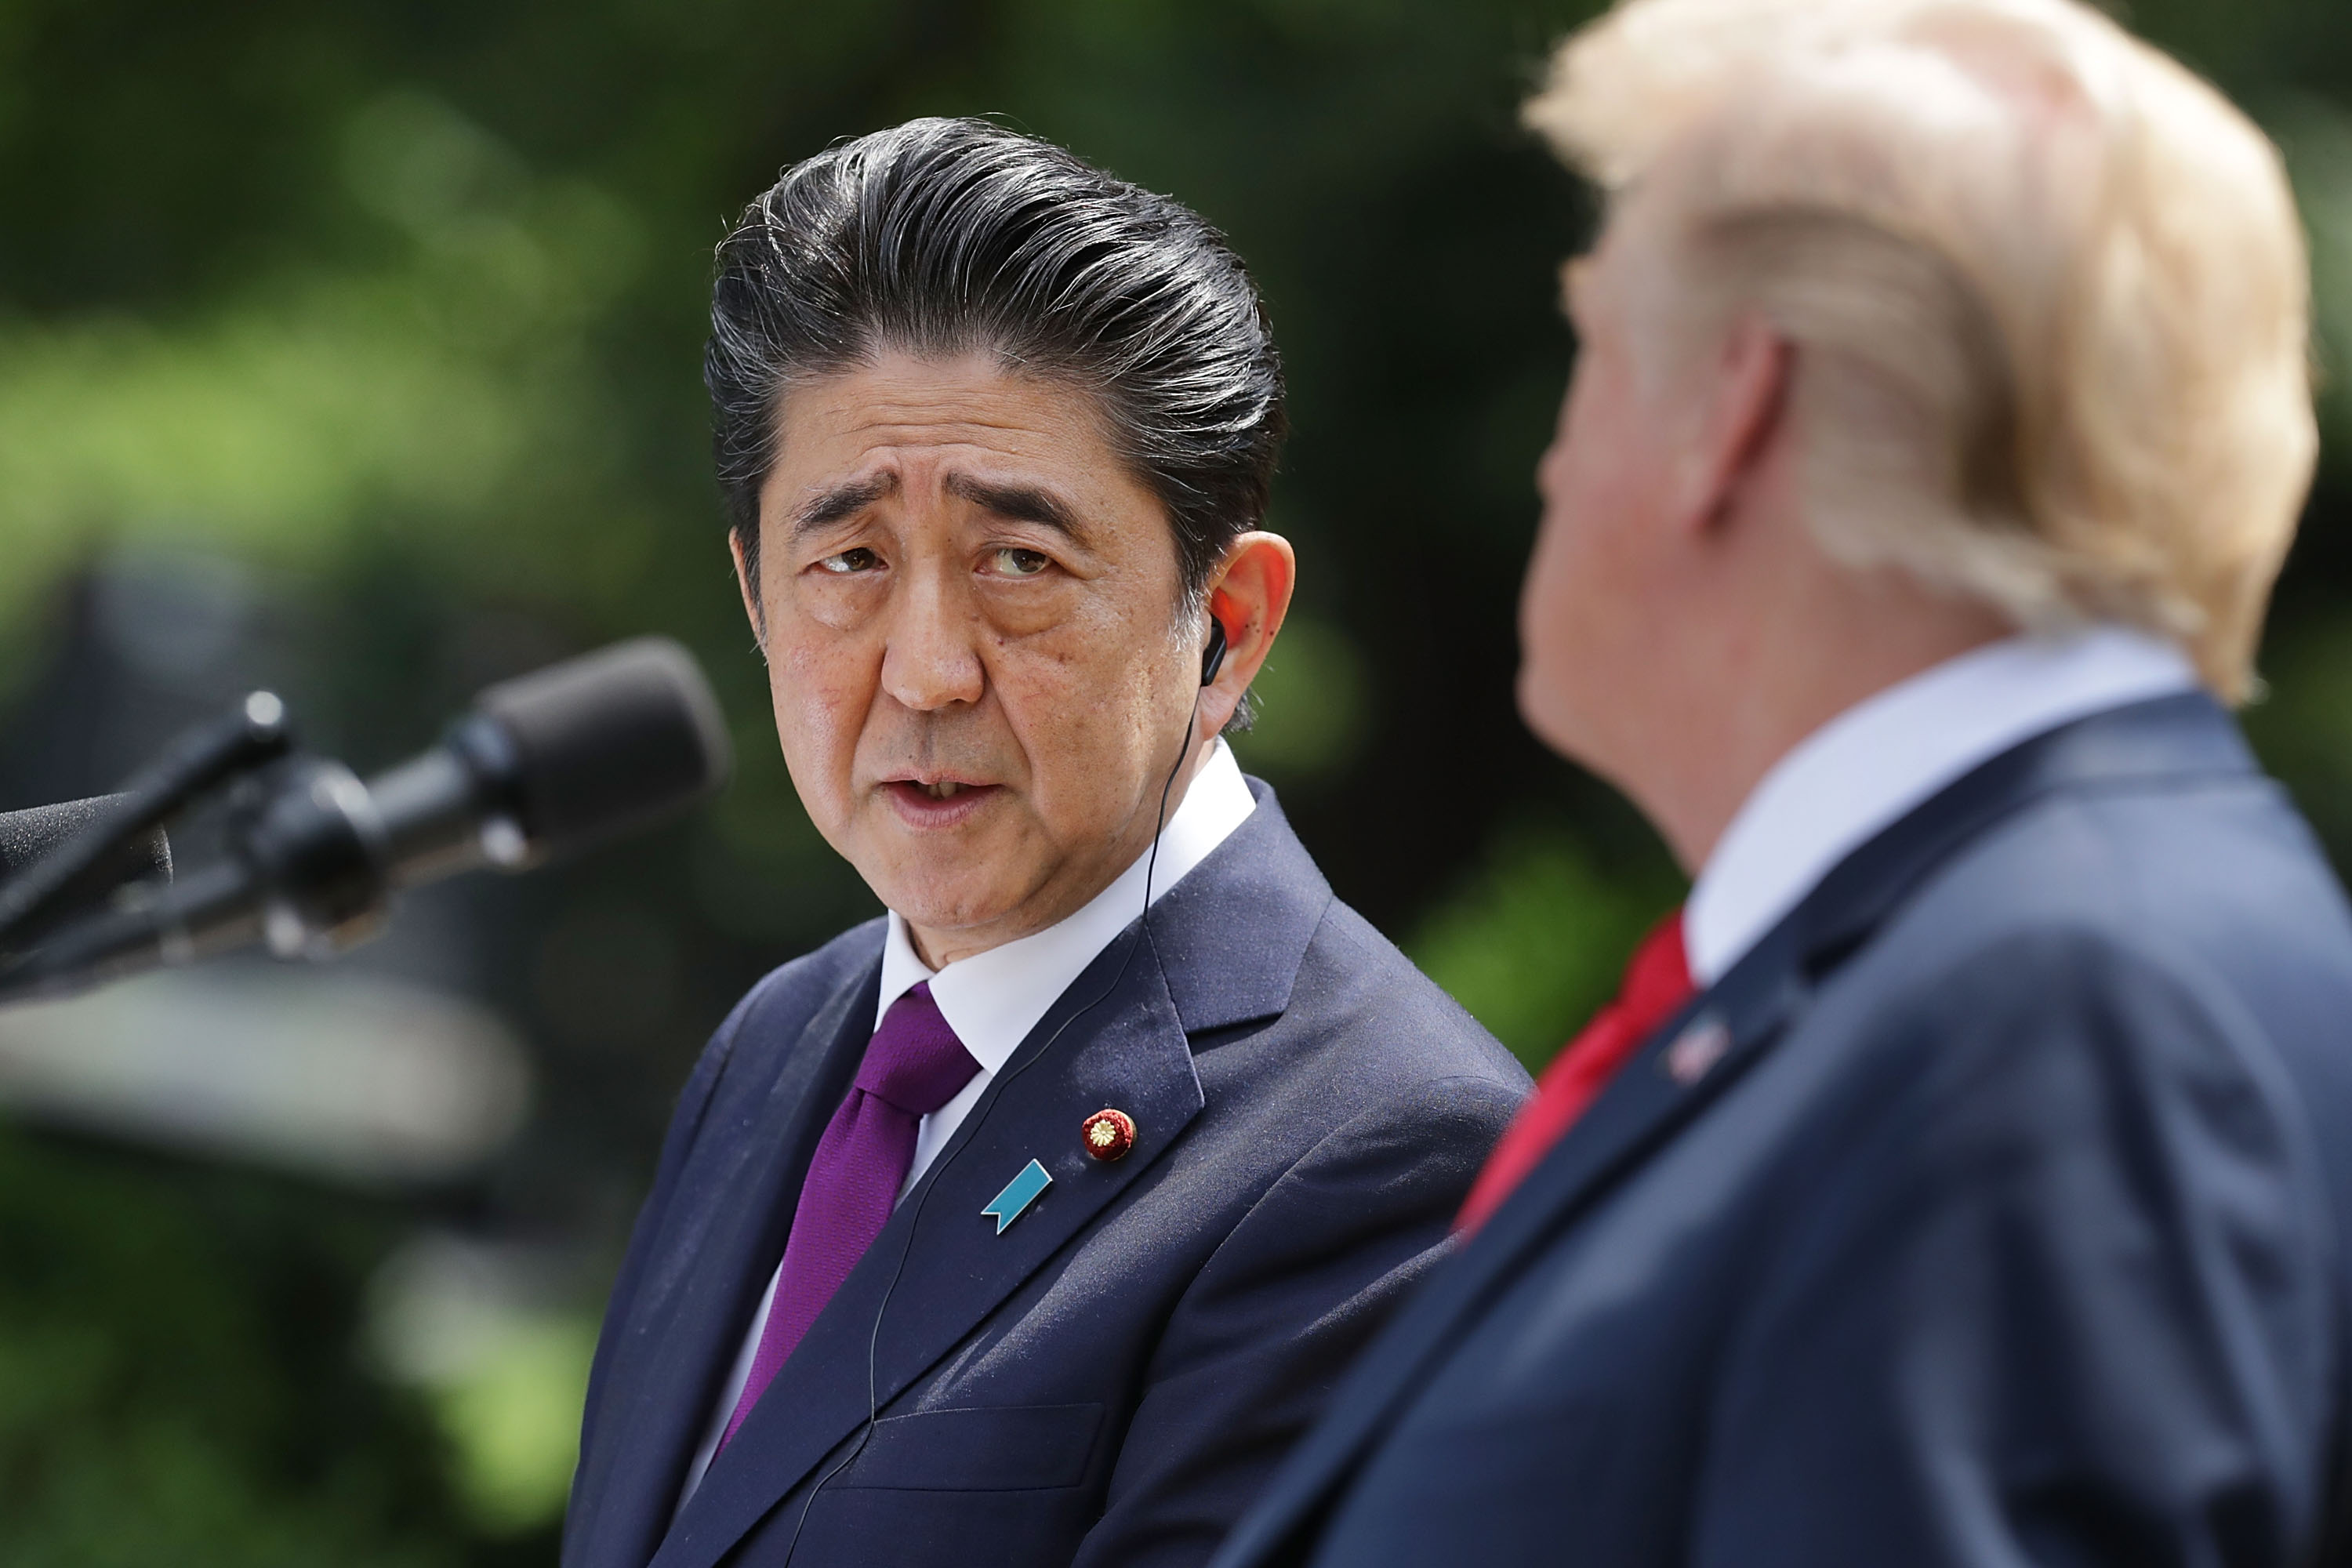 President Trump Holds Joint News Conference With Japanese Prime Minister Shinzo Abe